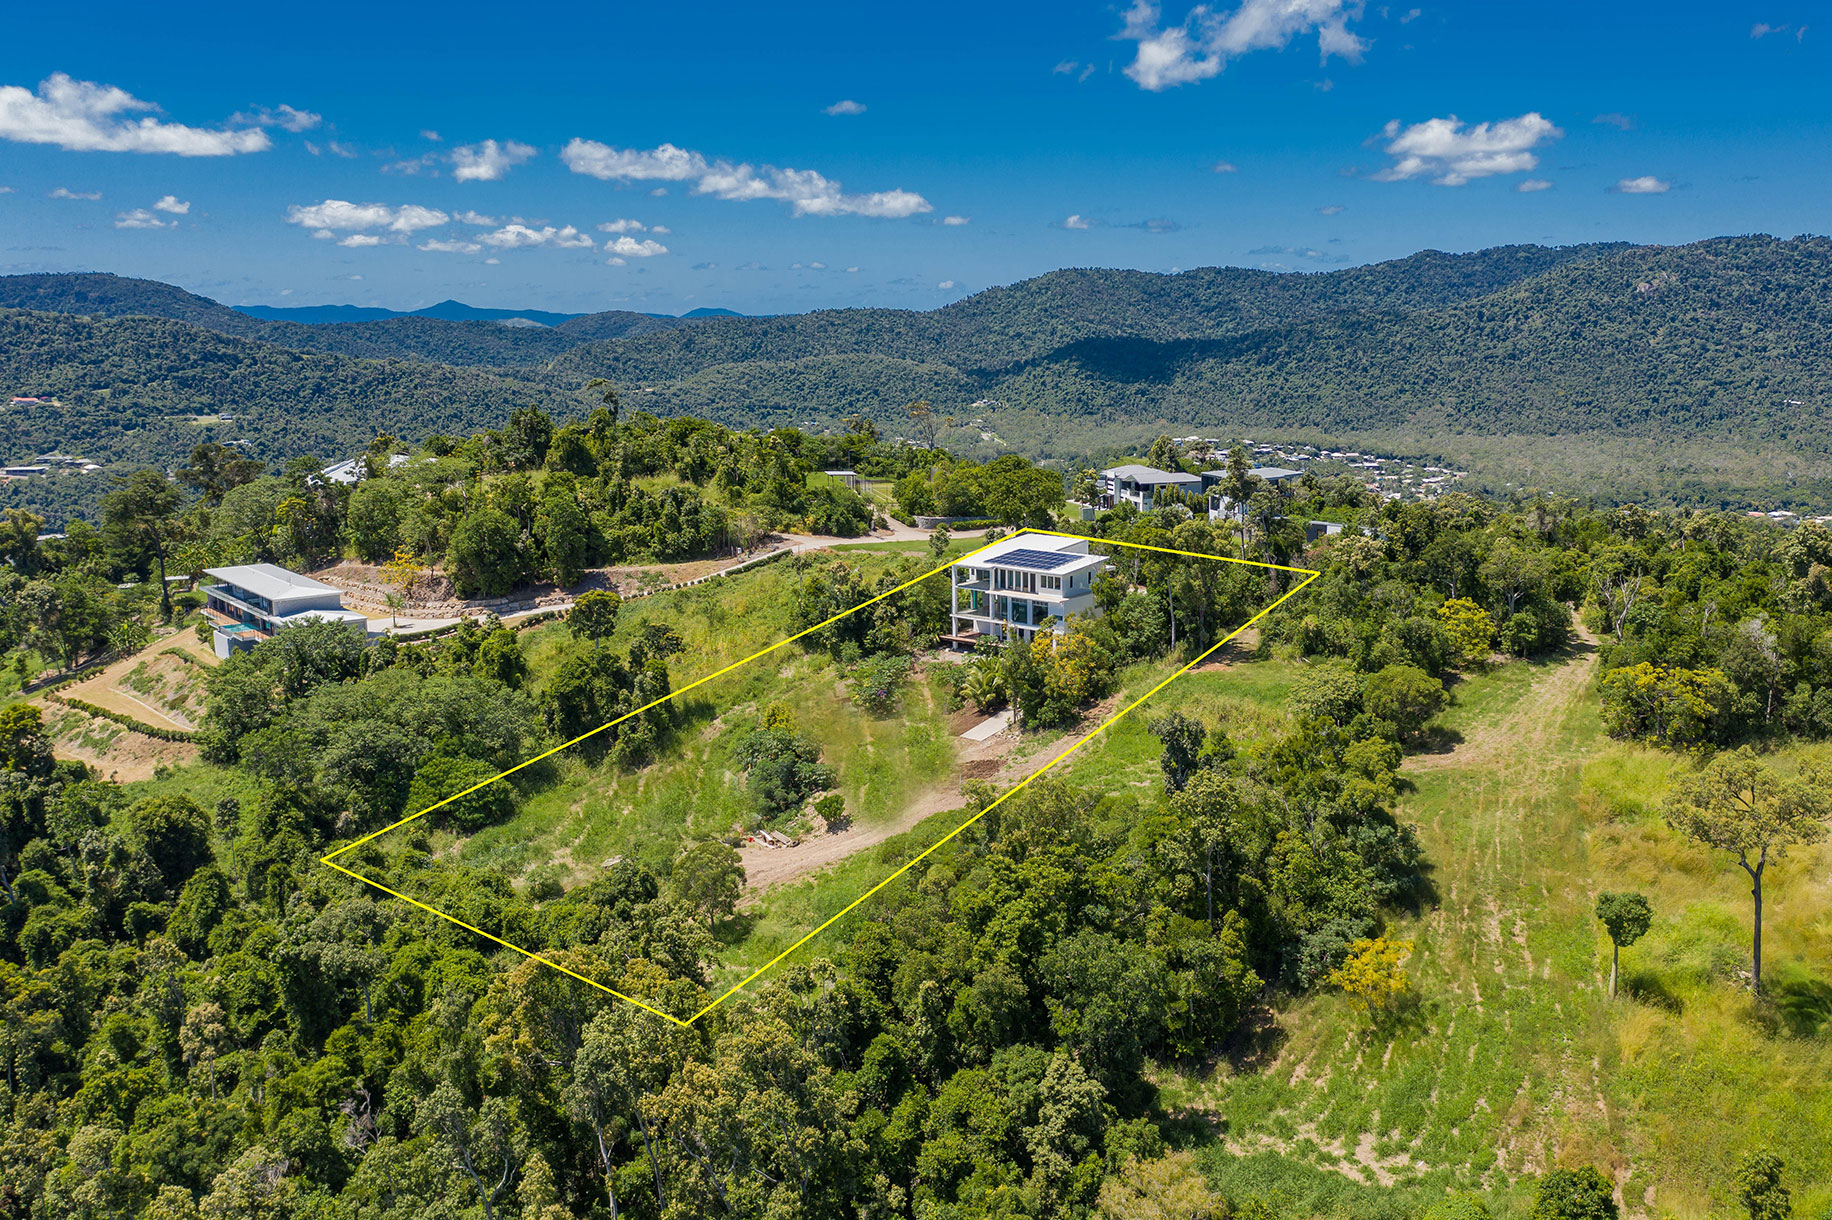 46 Mount Whitsunday Drive, Airlie Beach is situated on a large block of nearly one acre of land